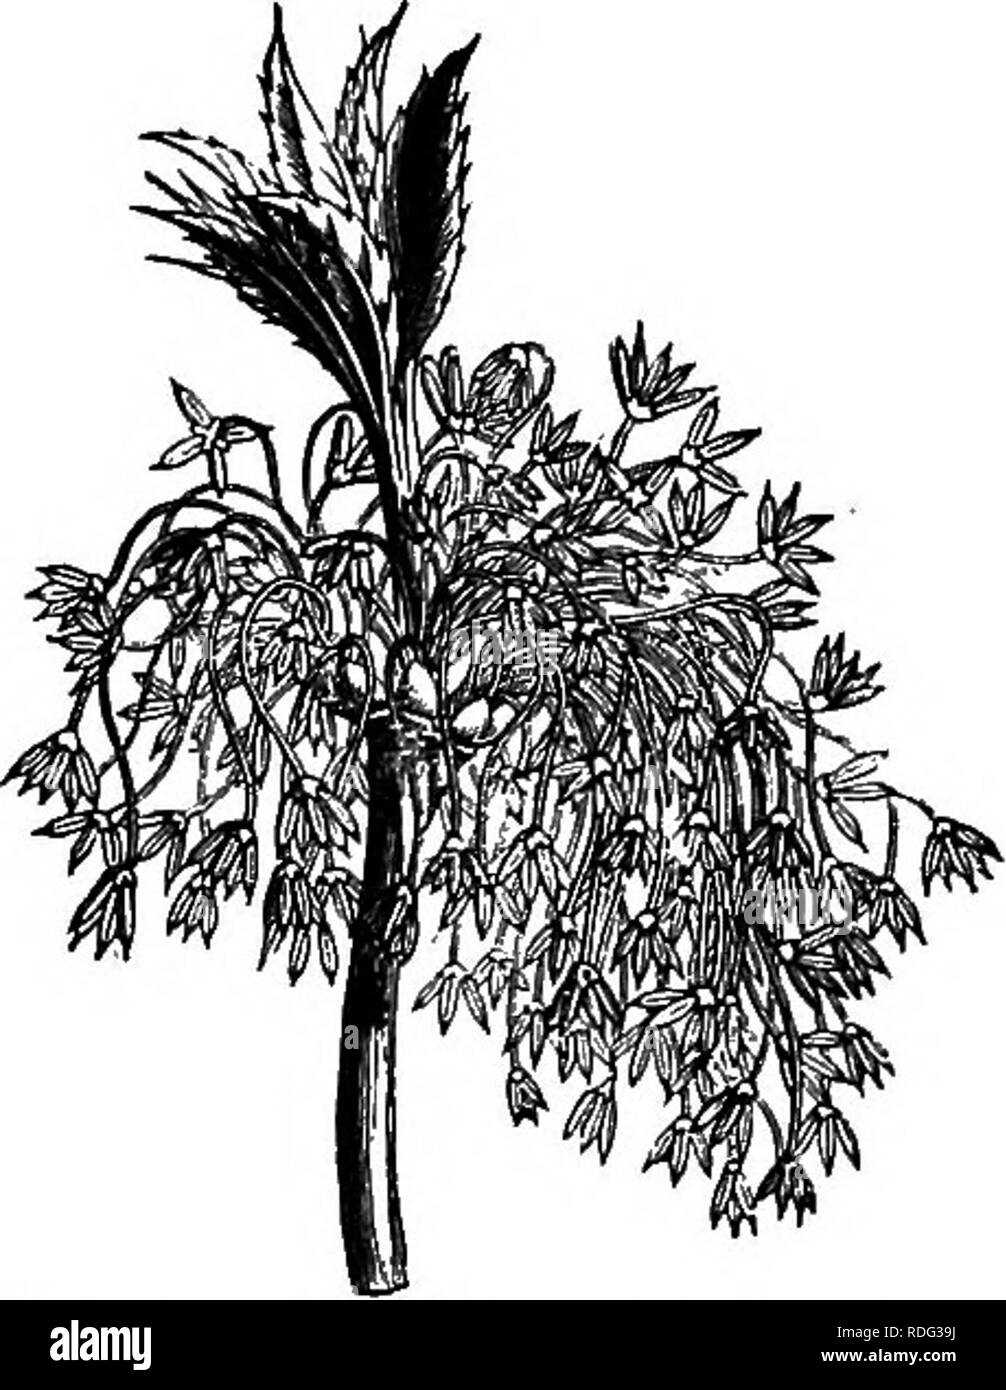 . The natural history of plants. Botany. Fig. 425. Fruit. a separate genus has been made,^ the apetalous, dioecious flowers have a small calyx and linear an- thers, exserted. This genus contains about fifty species,^ growing in Europe and North America and also .abounding in temperate Asia, the Himalayas, and Japan. Some are also found in Java. The leaves are op- posite, exstipulate, simple, entire, palmatilobate or palmati-partite, pinnate in Negundo. The flowers, which are precocious, axillary or terminal (green, yellow, reddish), are arranged in spiciform or corymbi- form clusters of cymes. Stock Photo